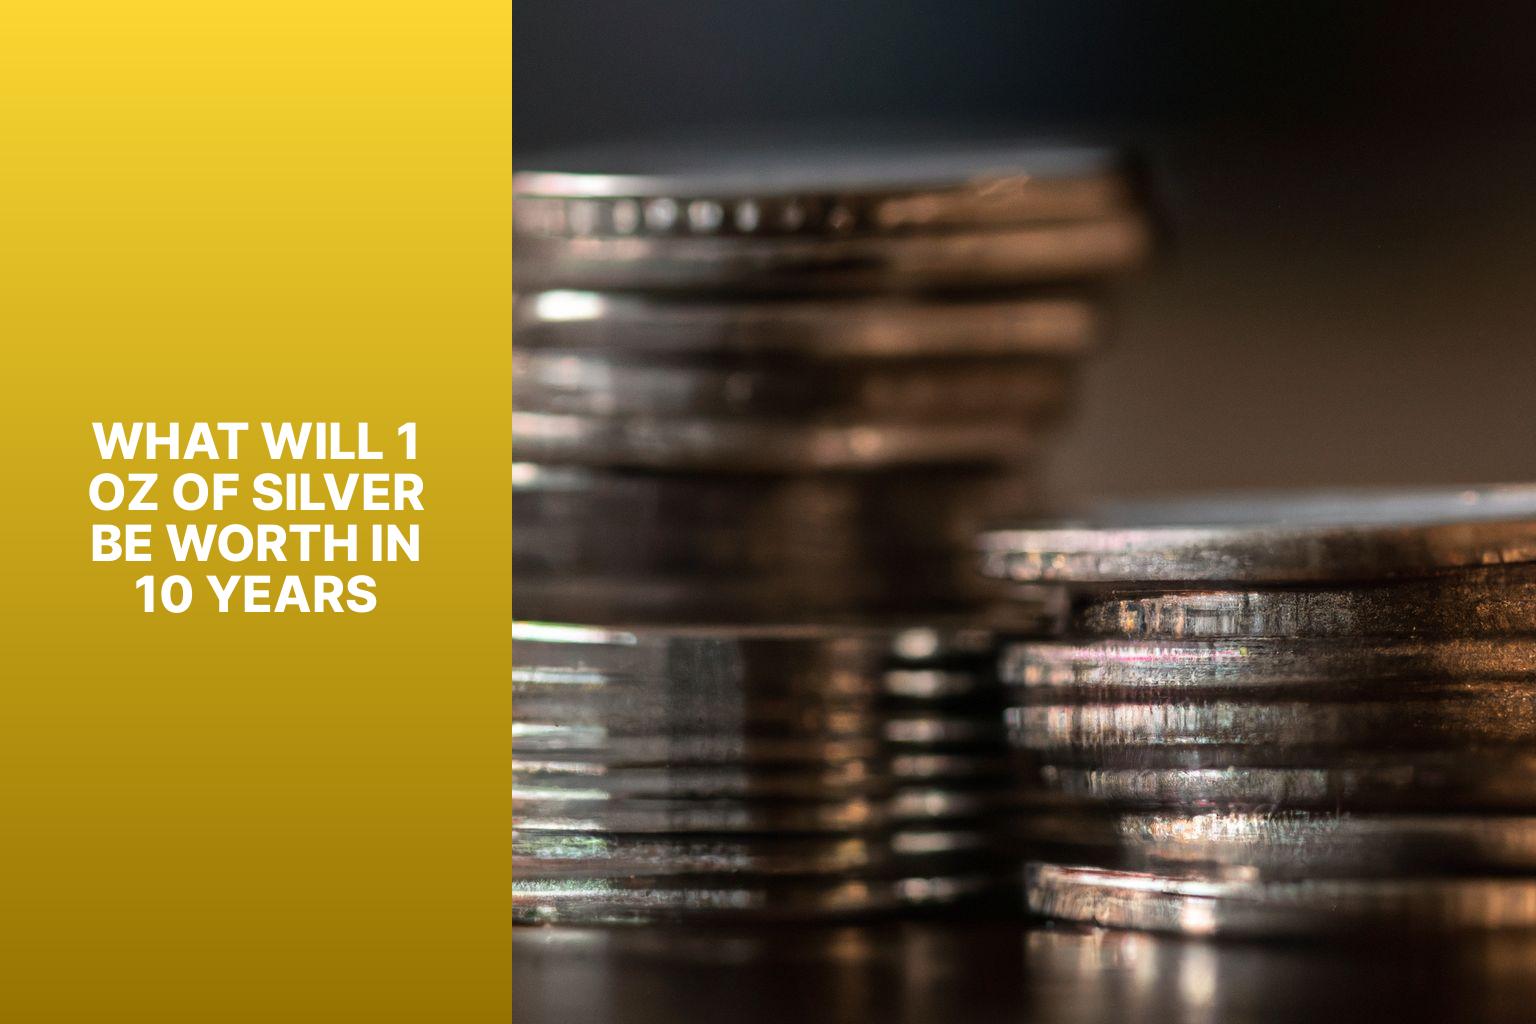 What Will 1 Oz Of Silver Be Worth In 10 Years